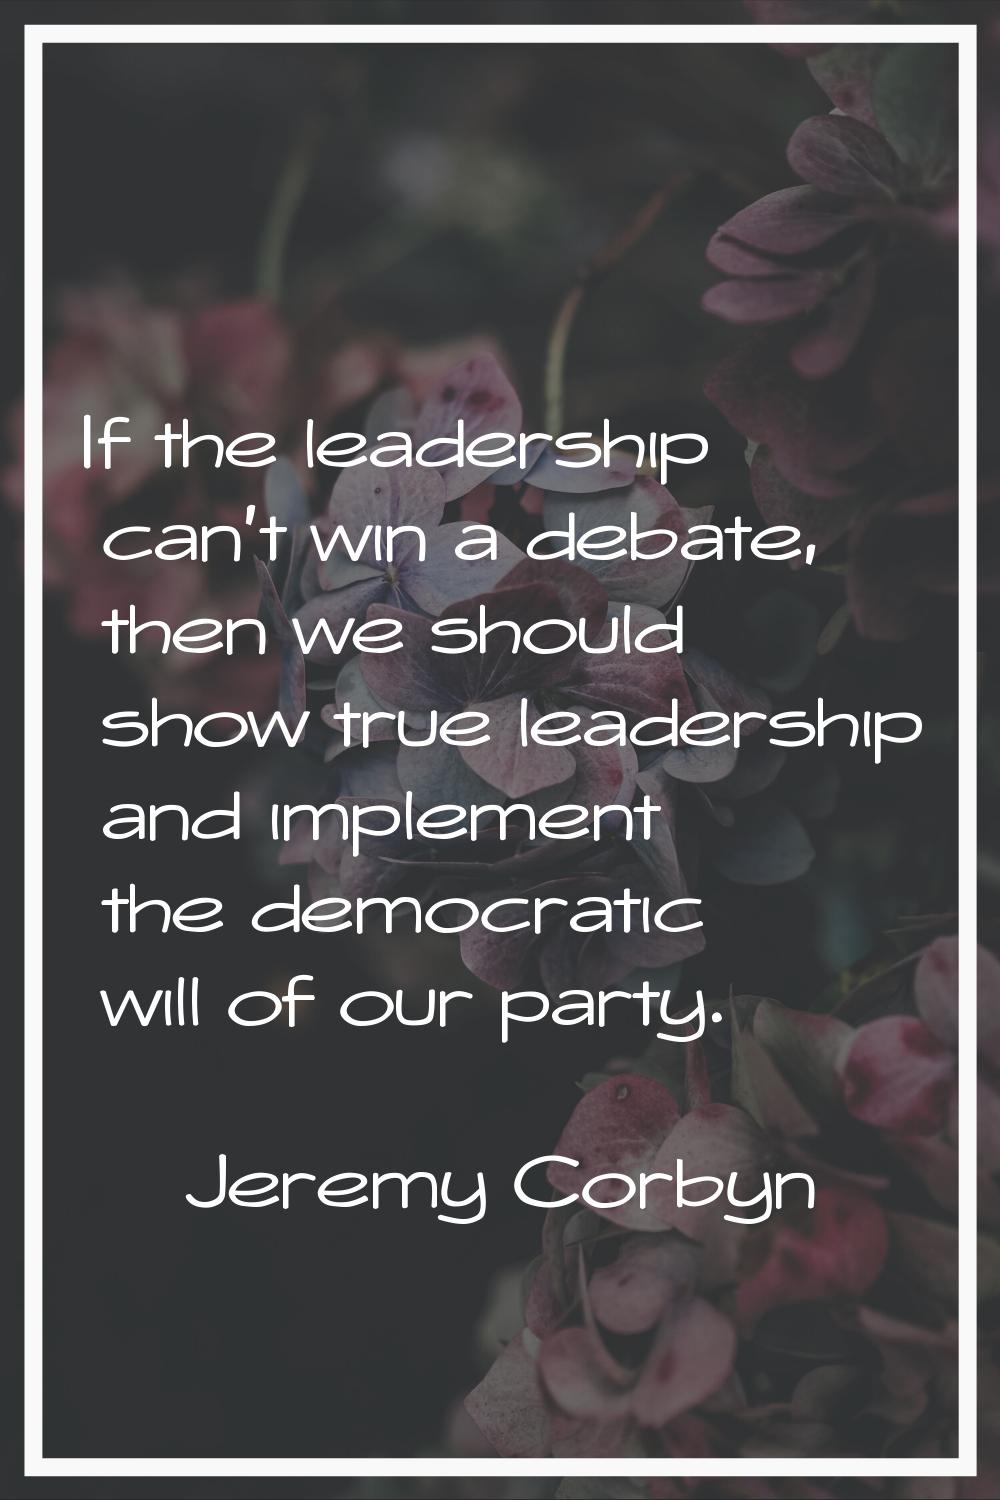 If the leadership can't win a debate, then we should show true leadership and implement the democra